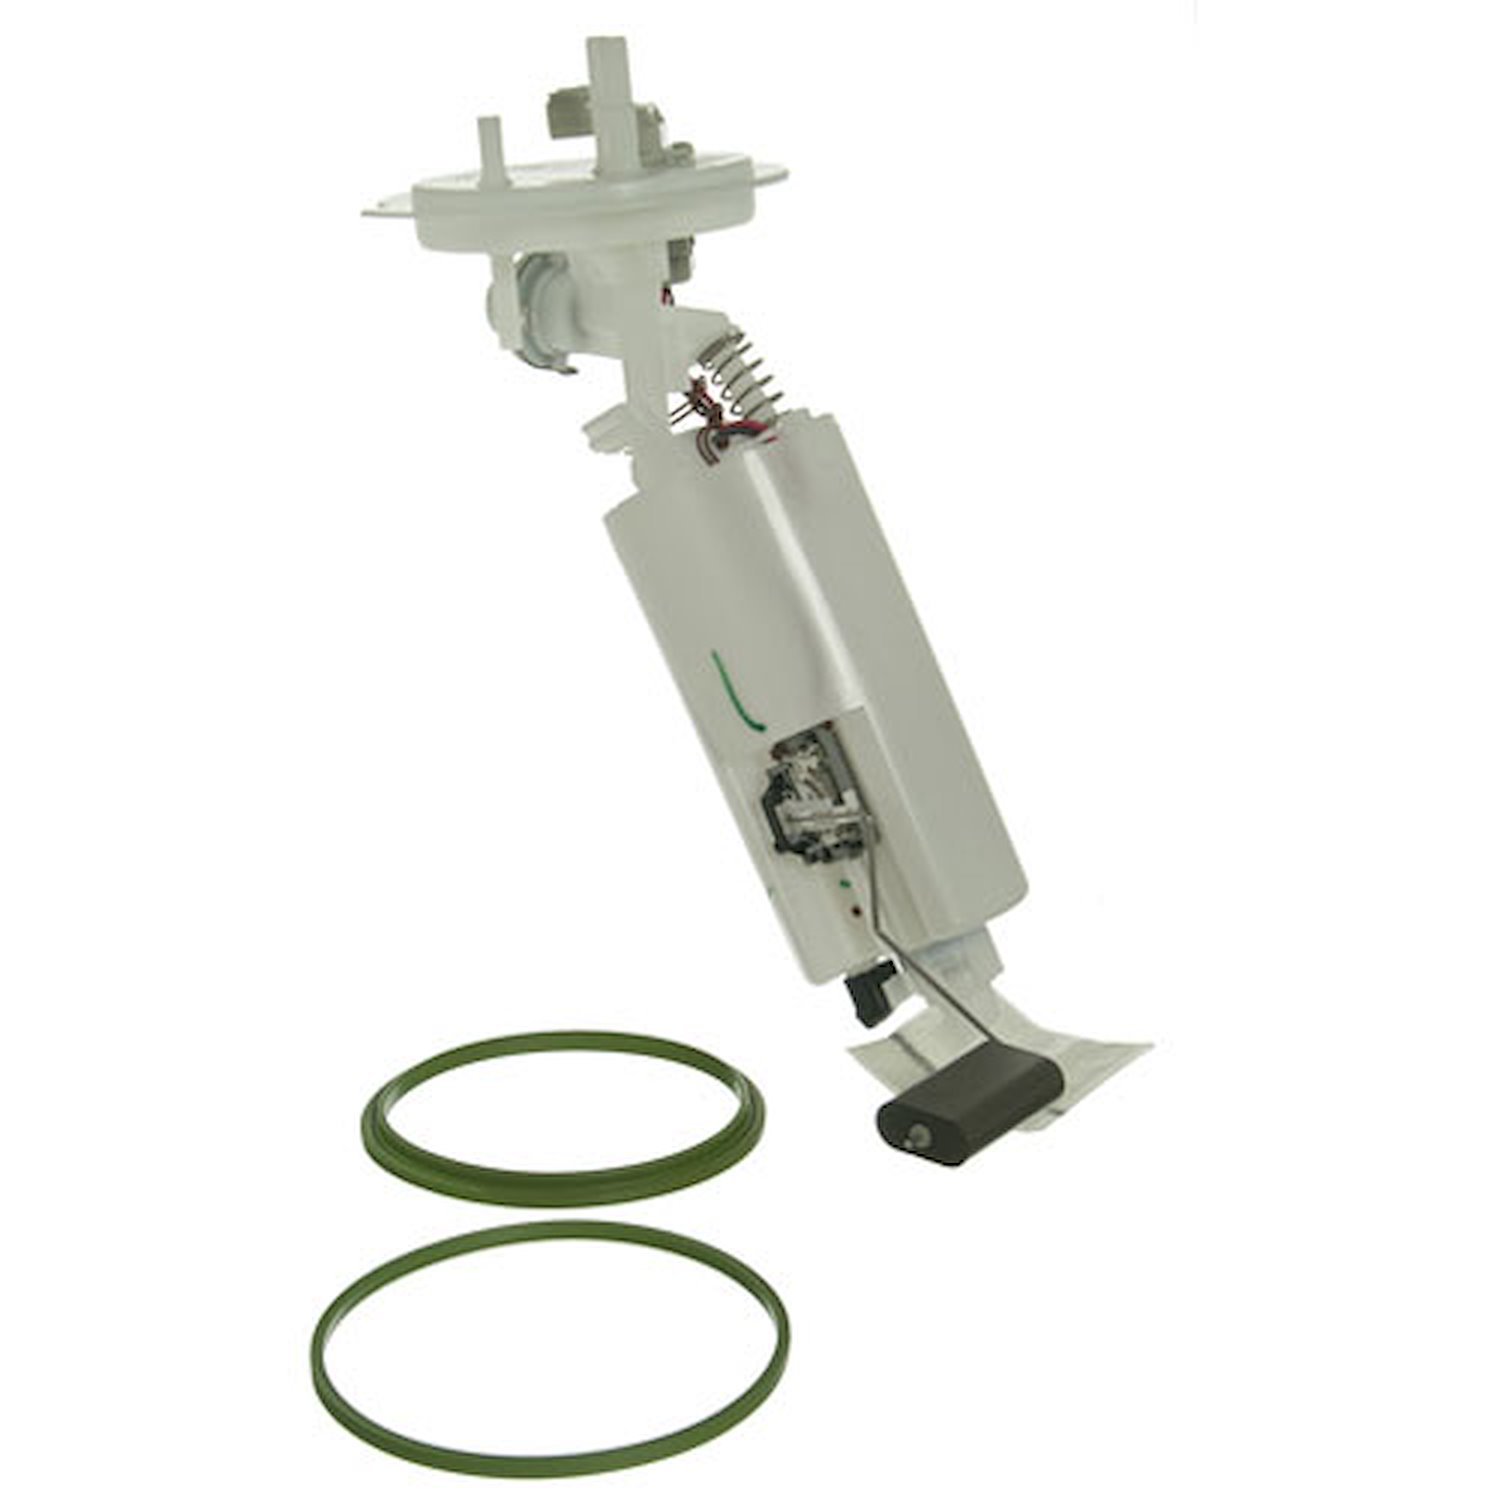 OE Chrysler/Dodge Replacement Electric Fuel Pump Module Assembly 2001-03 Chrysler Town & Country/Voyager 2.4L 4 Cyl/3.3L/3.8L V6